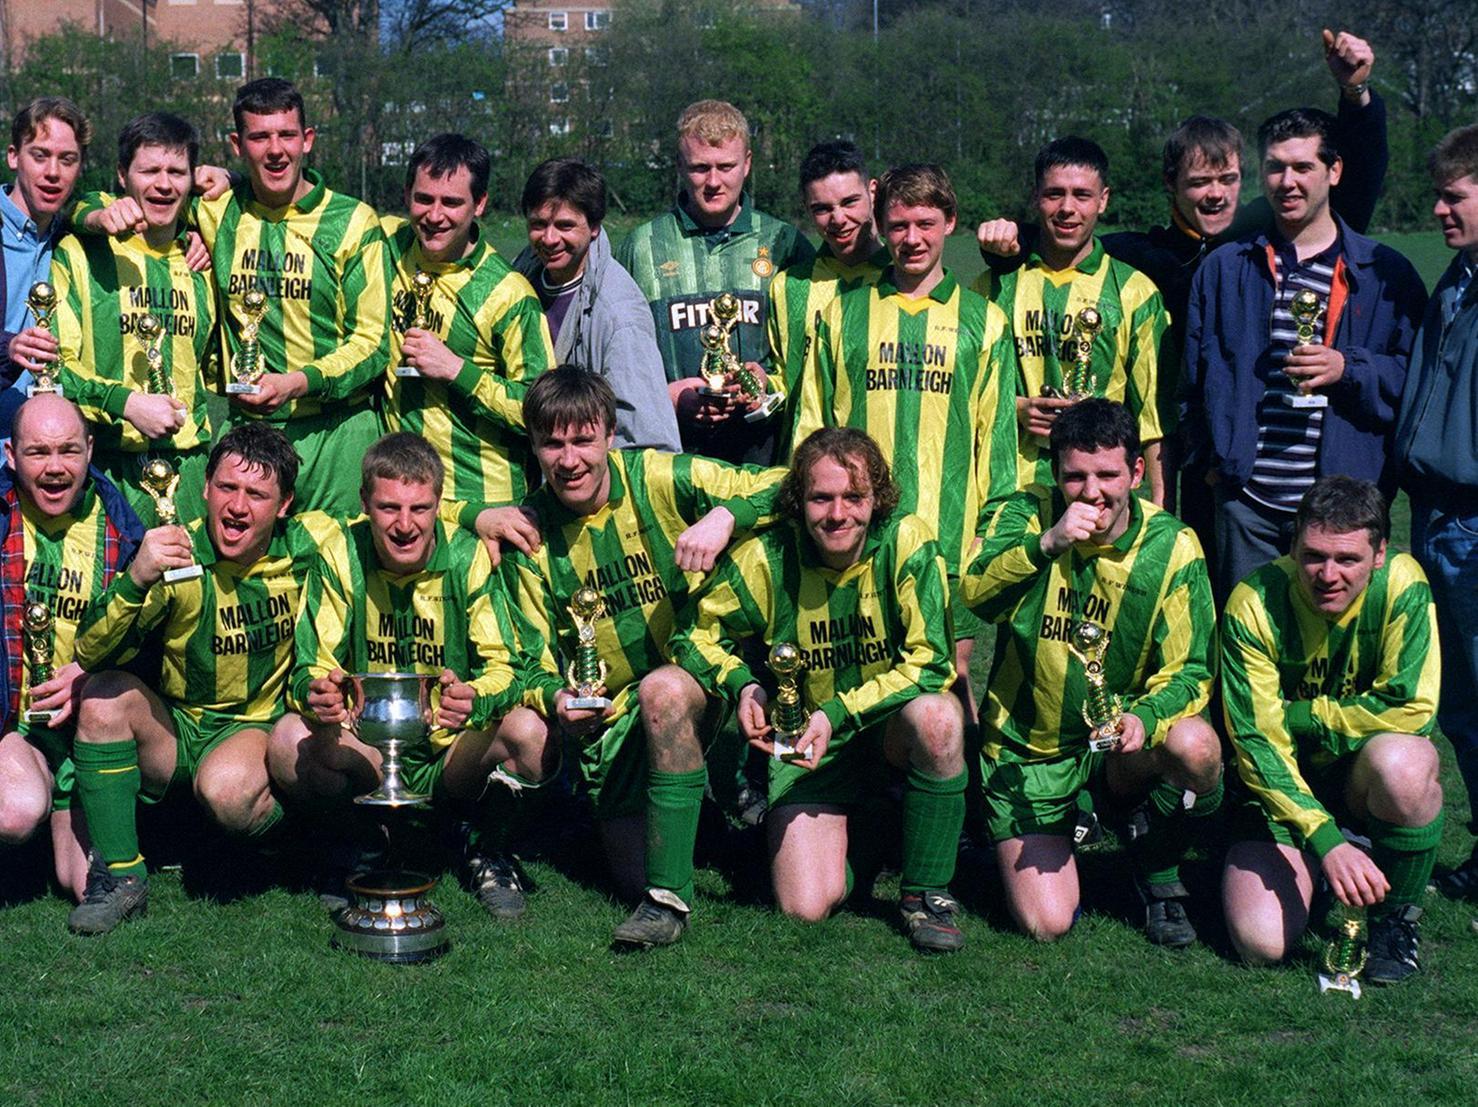 Barnelight beat Nwelson 2-0 to win the Leeds Red Triangle  Invitation Football League Yorkshire Evening News Cup.